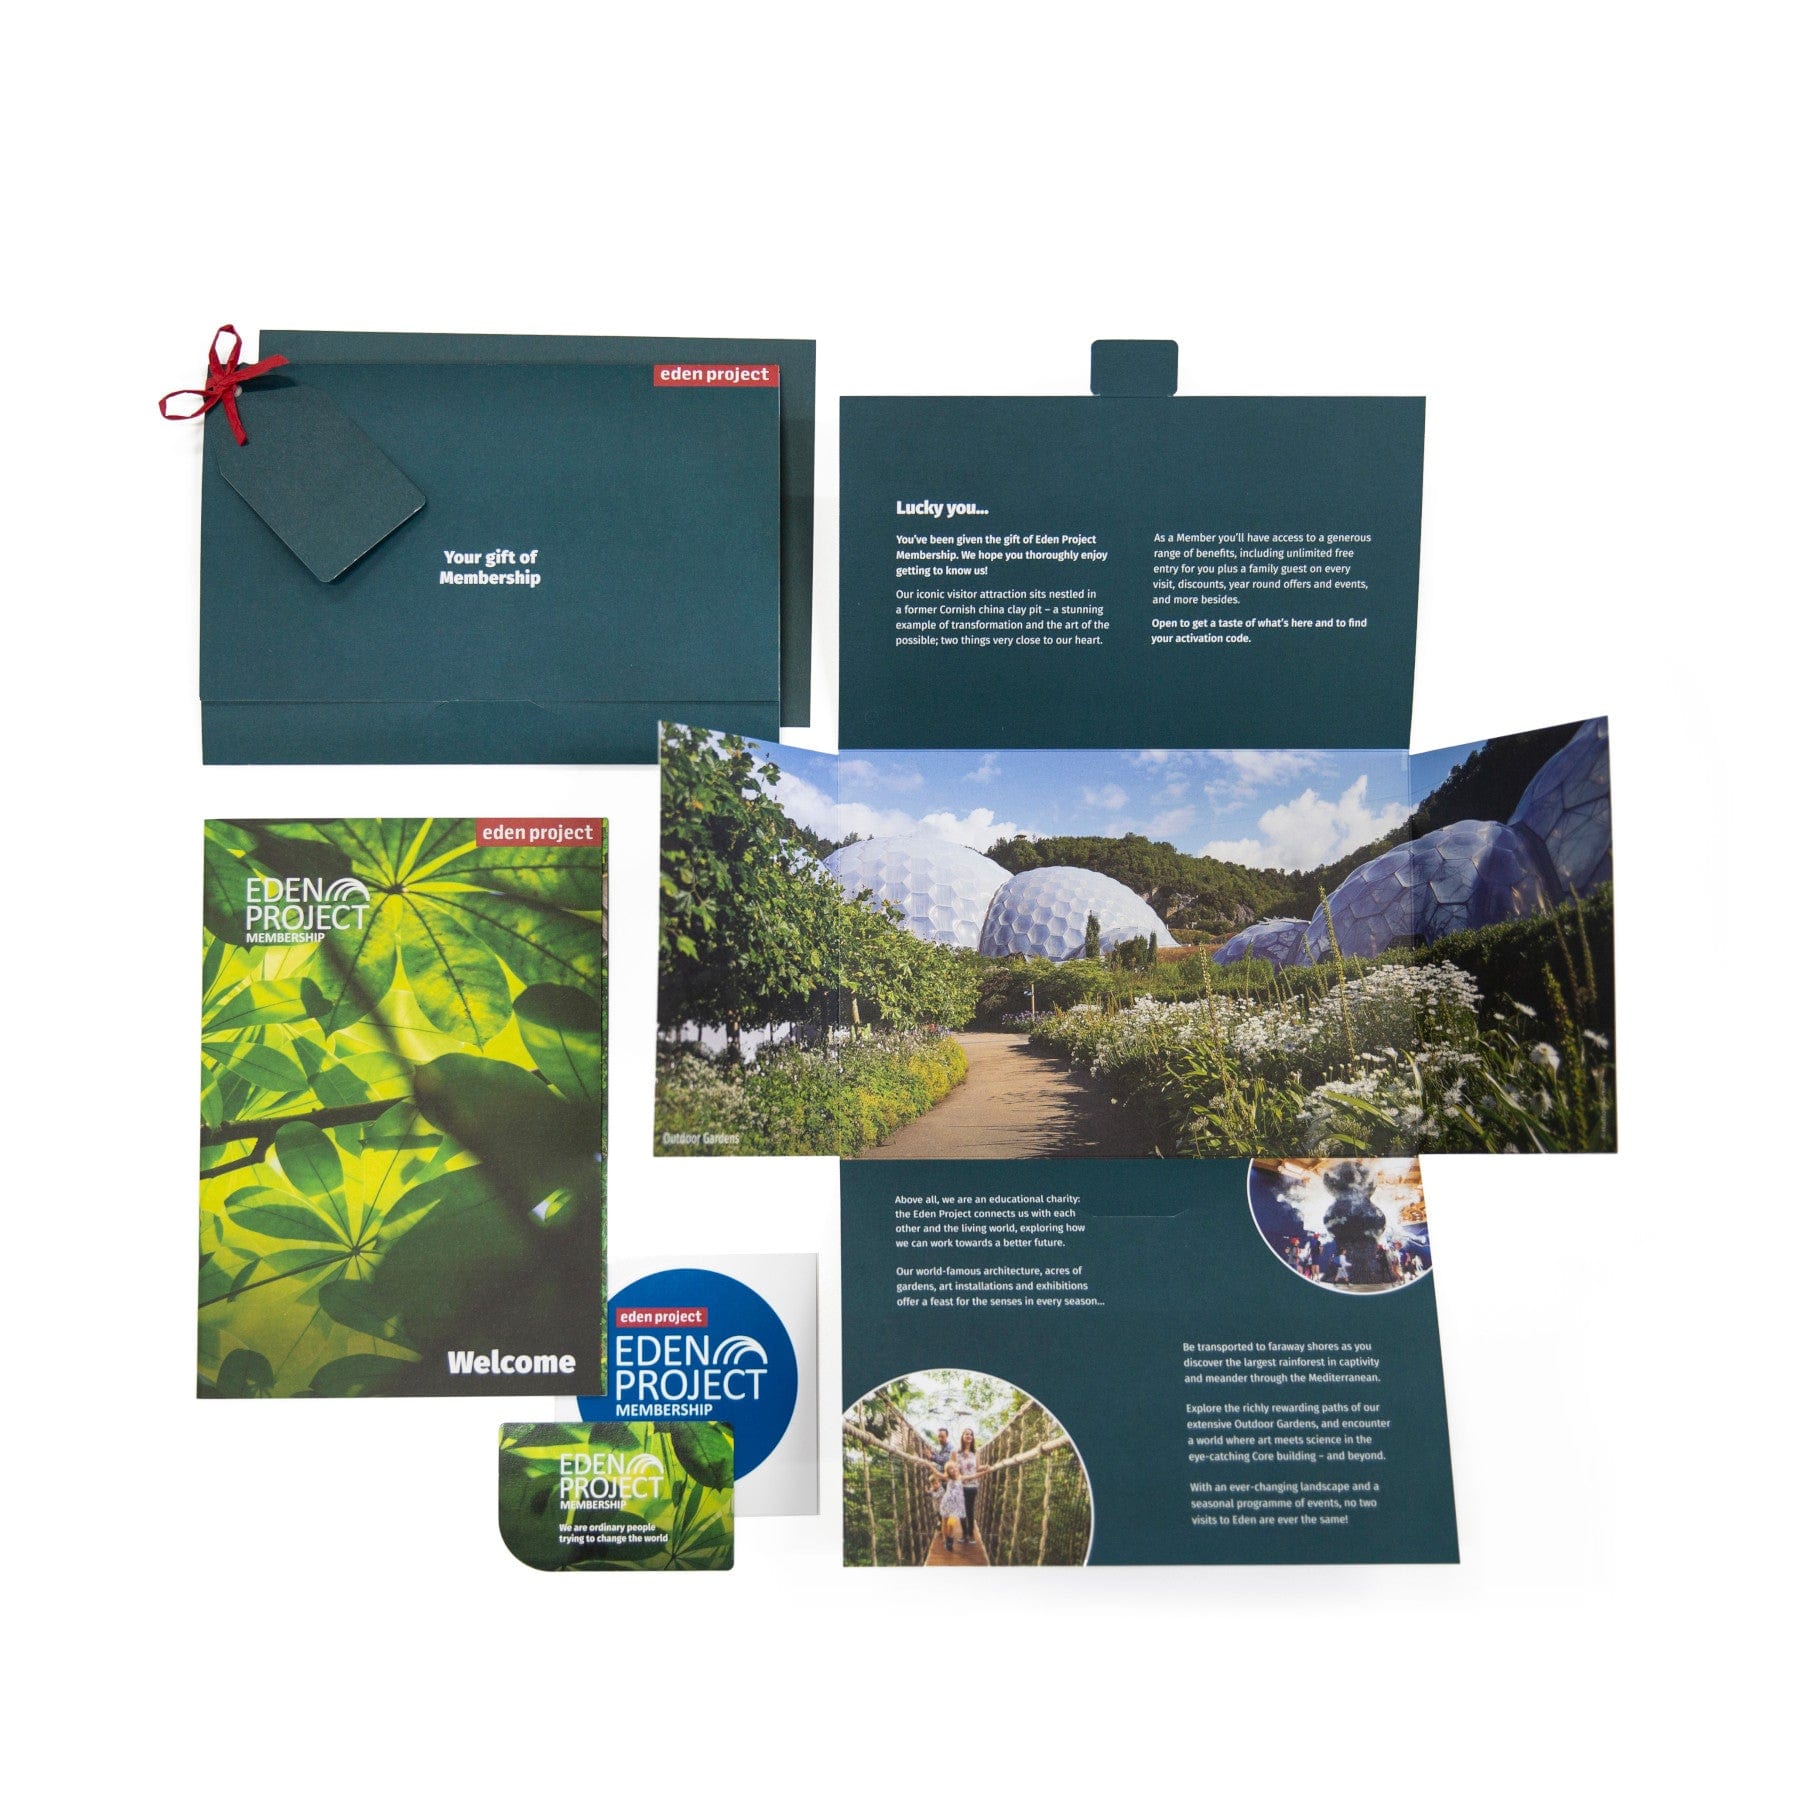 Eden Project marketing materials spread out, including membership pack, welcome brochure, gift envelope with red tie, and promotional leaflets showcasing garden domes.